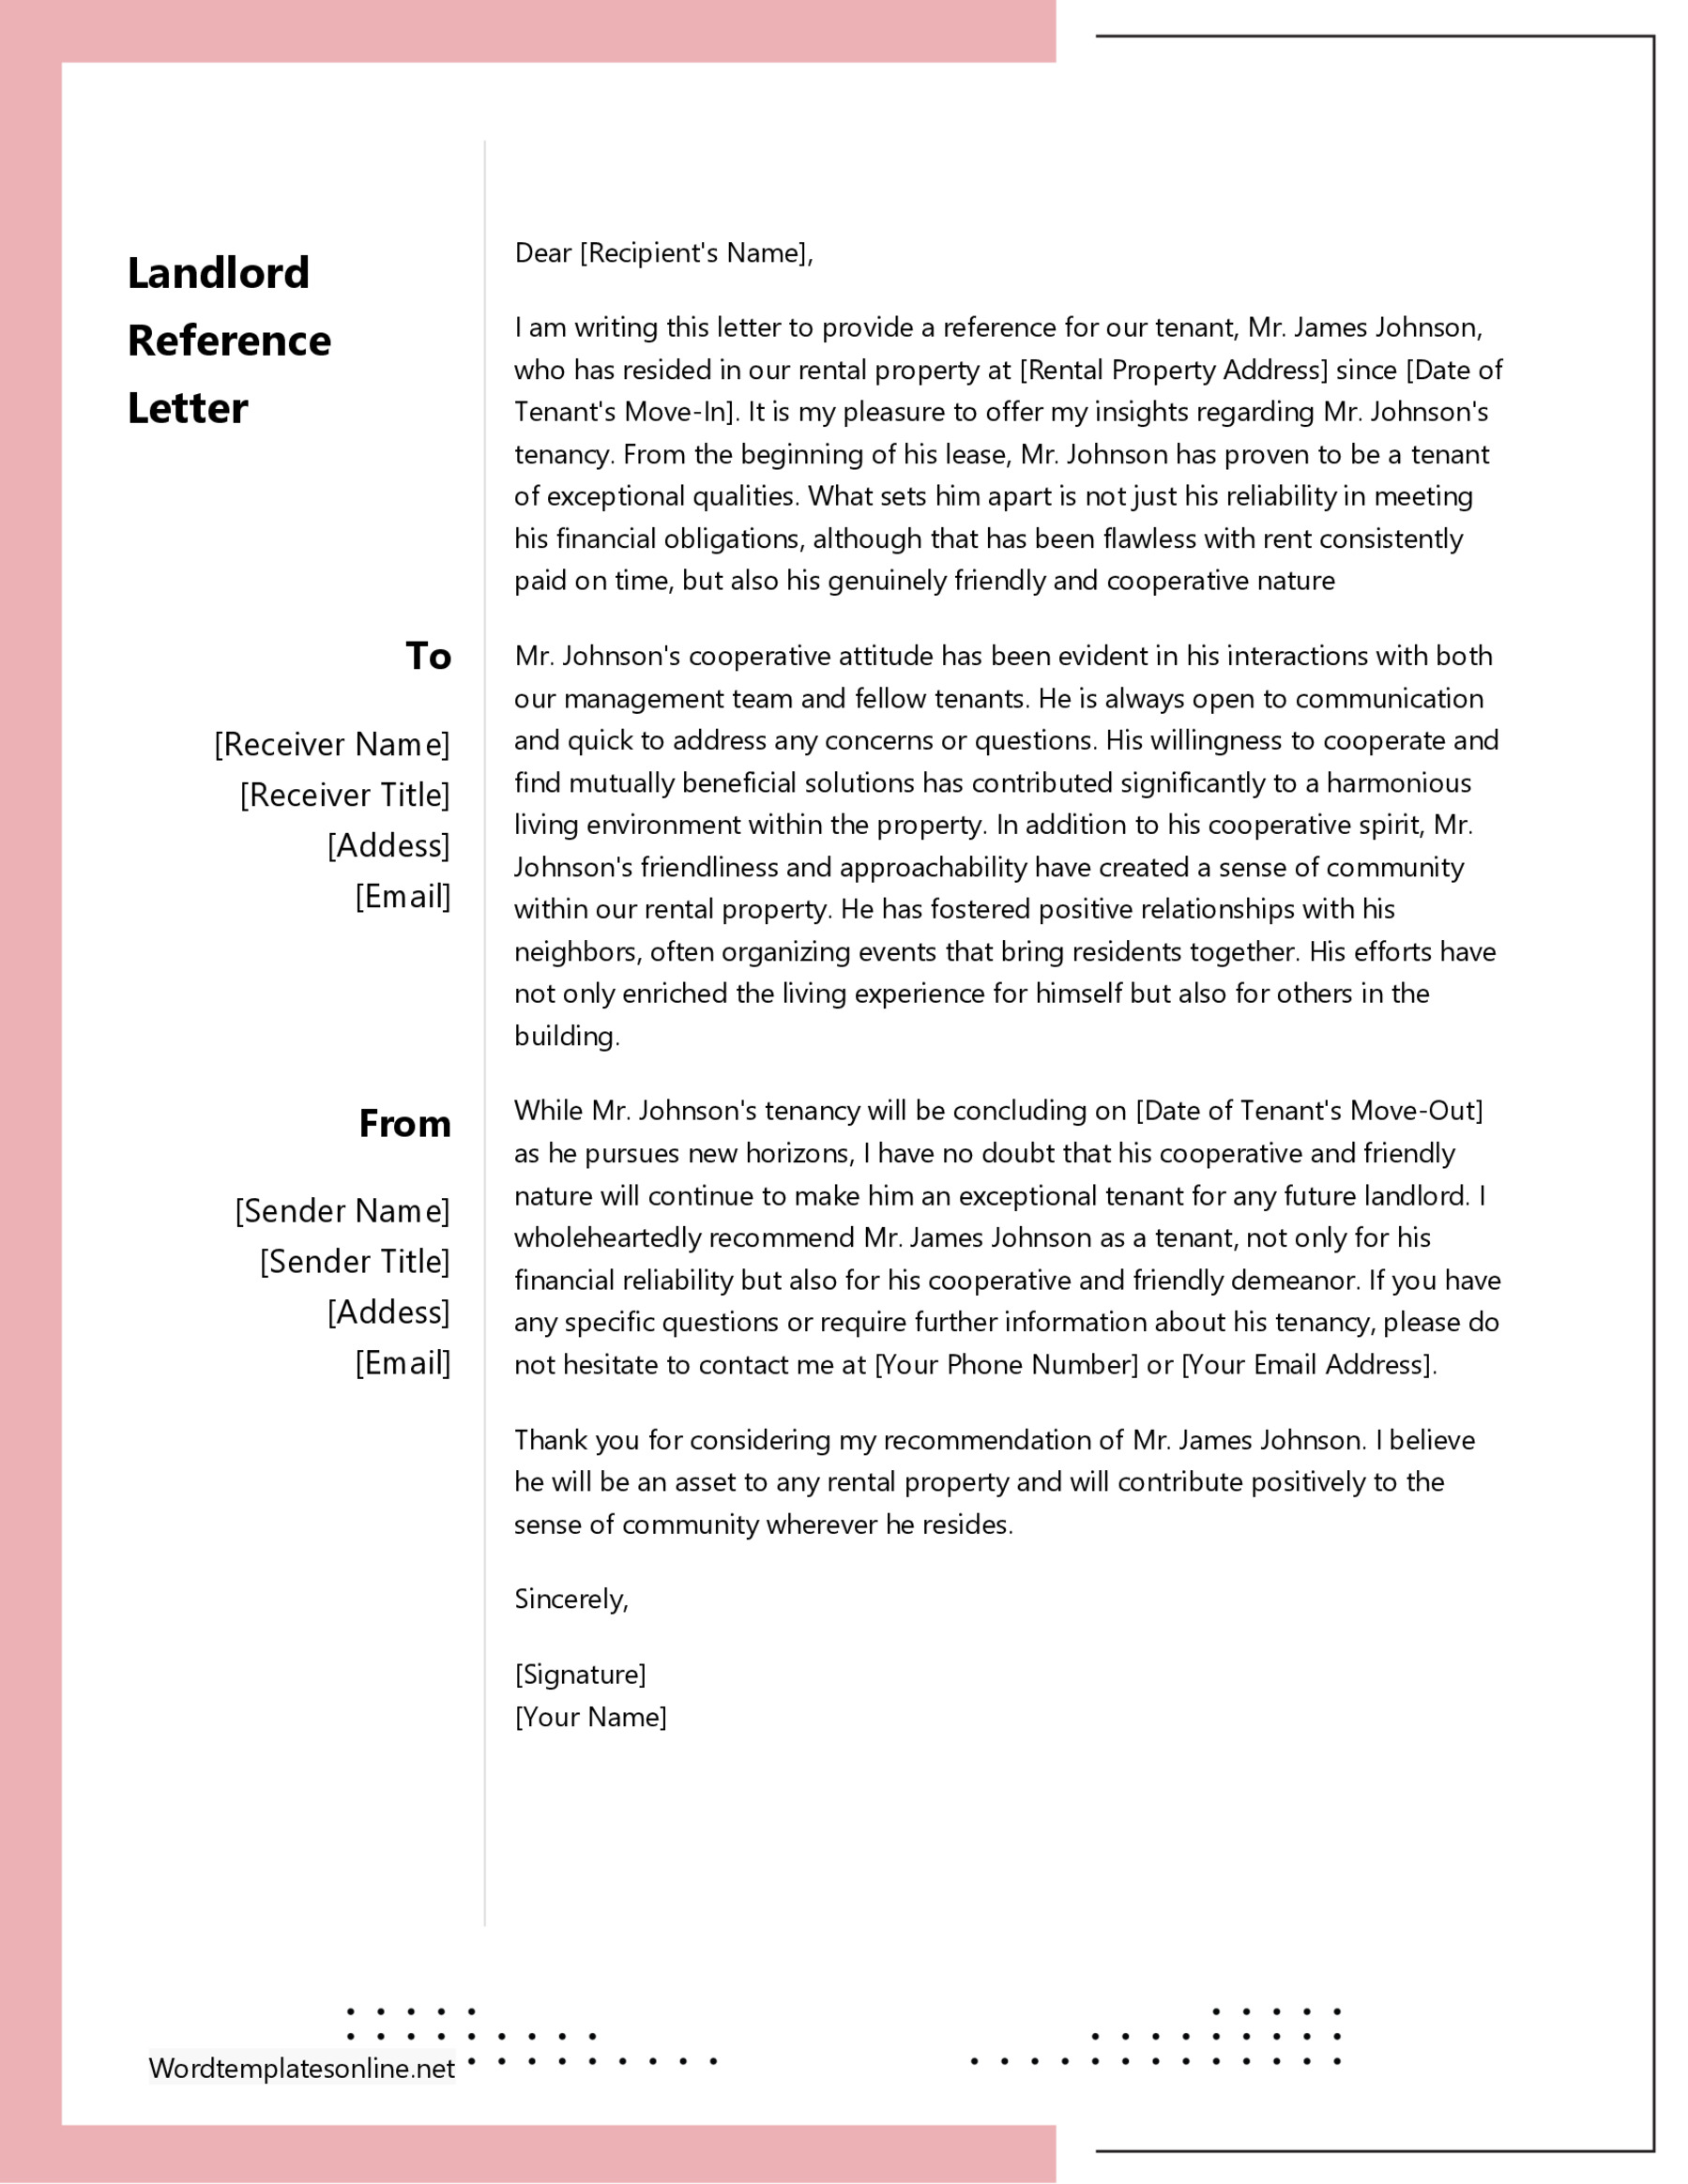 Editable Landlord Reference Letter in Word Format